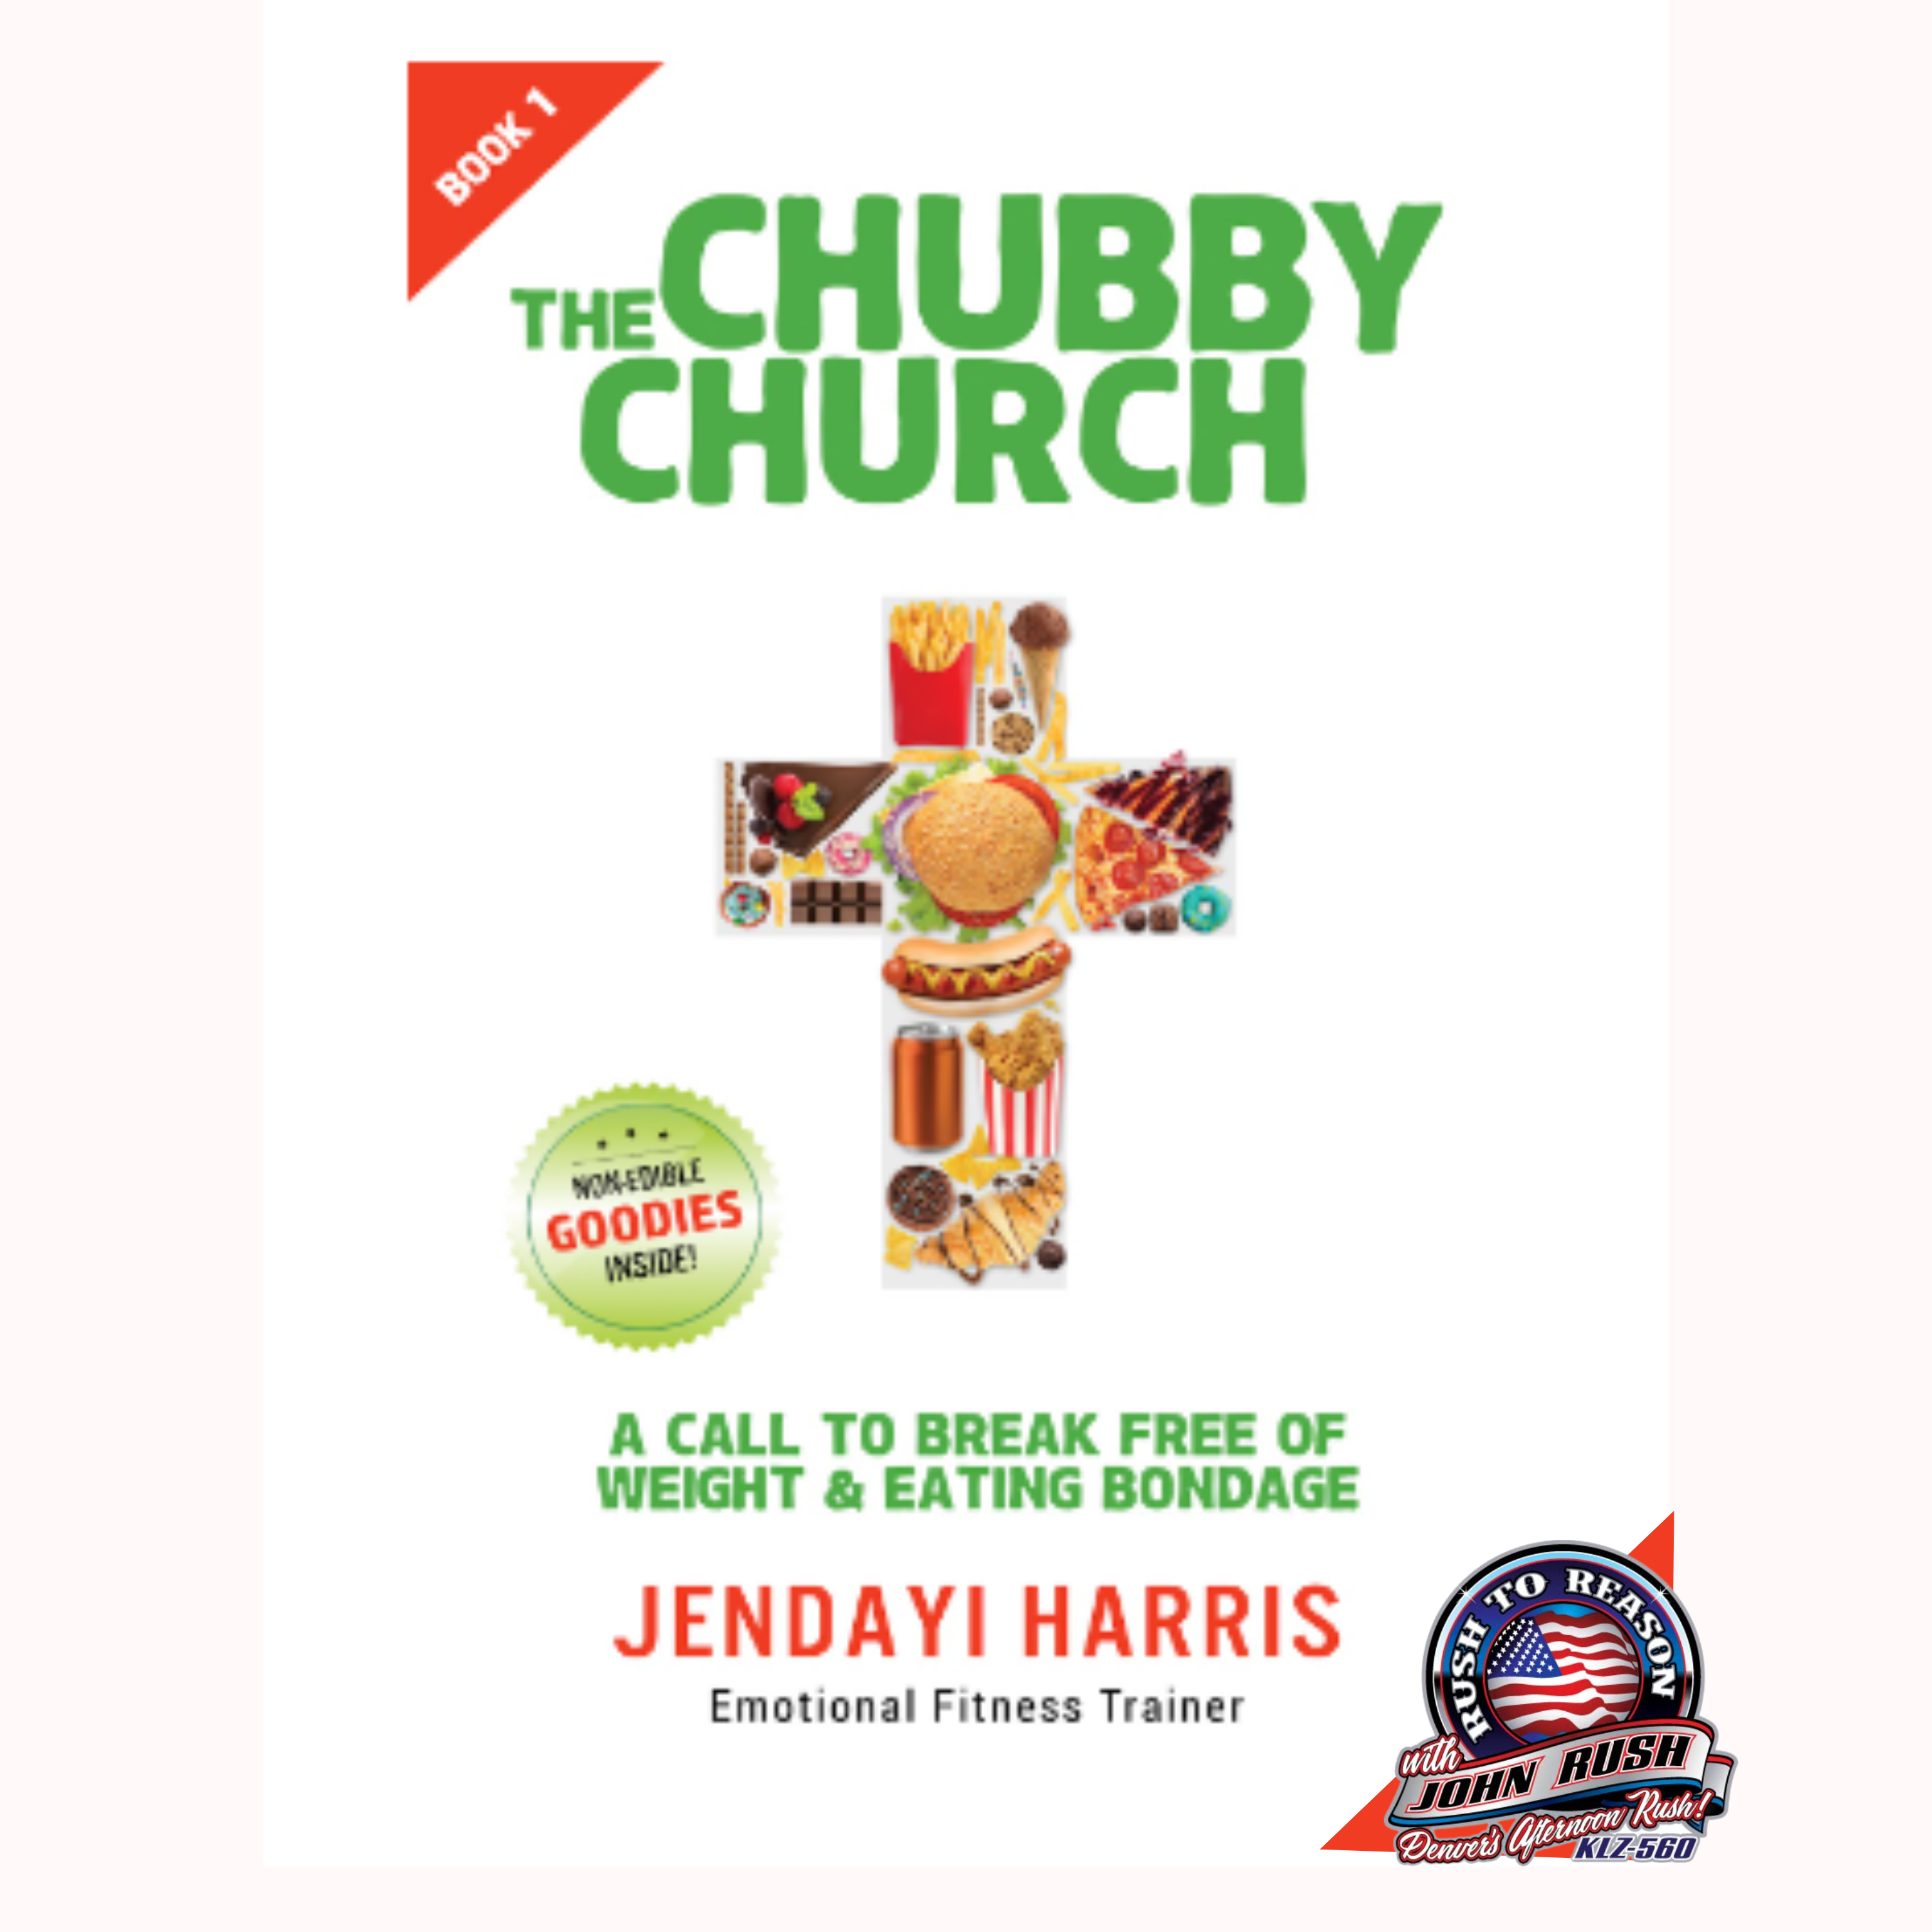 The Chubby Church Series with Author Jendayi Harris